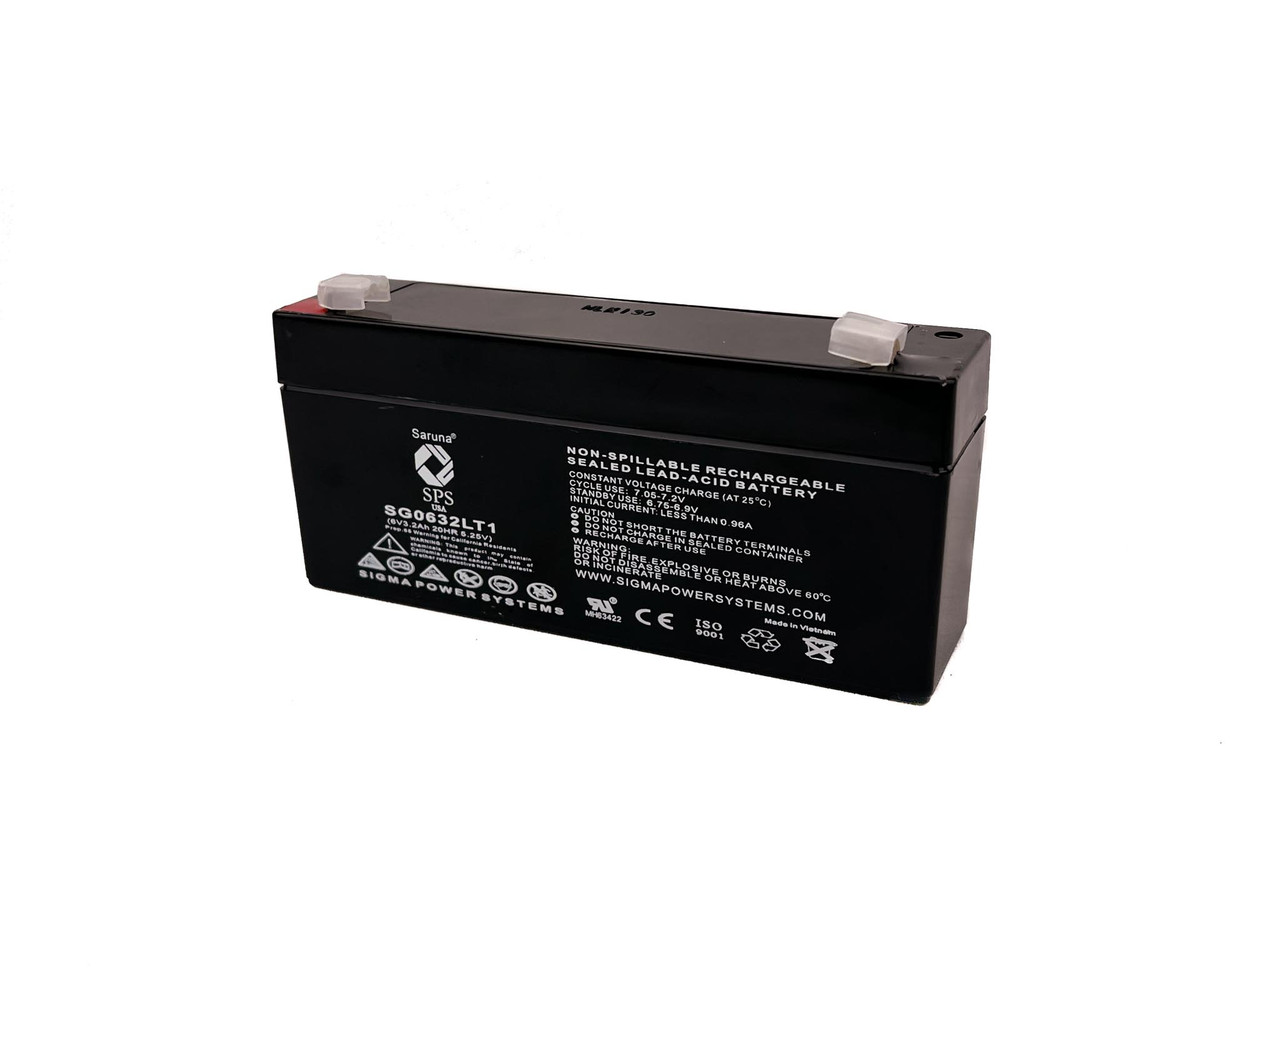 Raion Power 6V 3.2Ah Non-Spillable Replacement Rechargebale Battery for Impact Instrumentation 302 Portable Aspirator